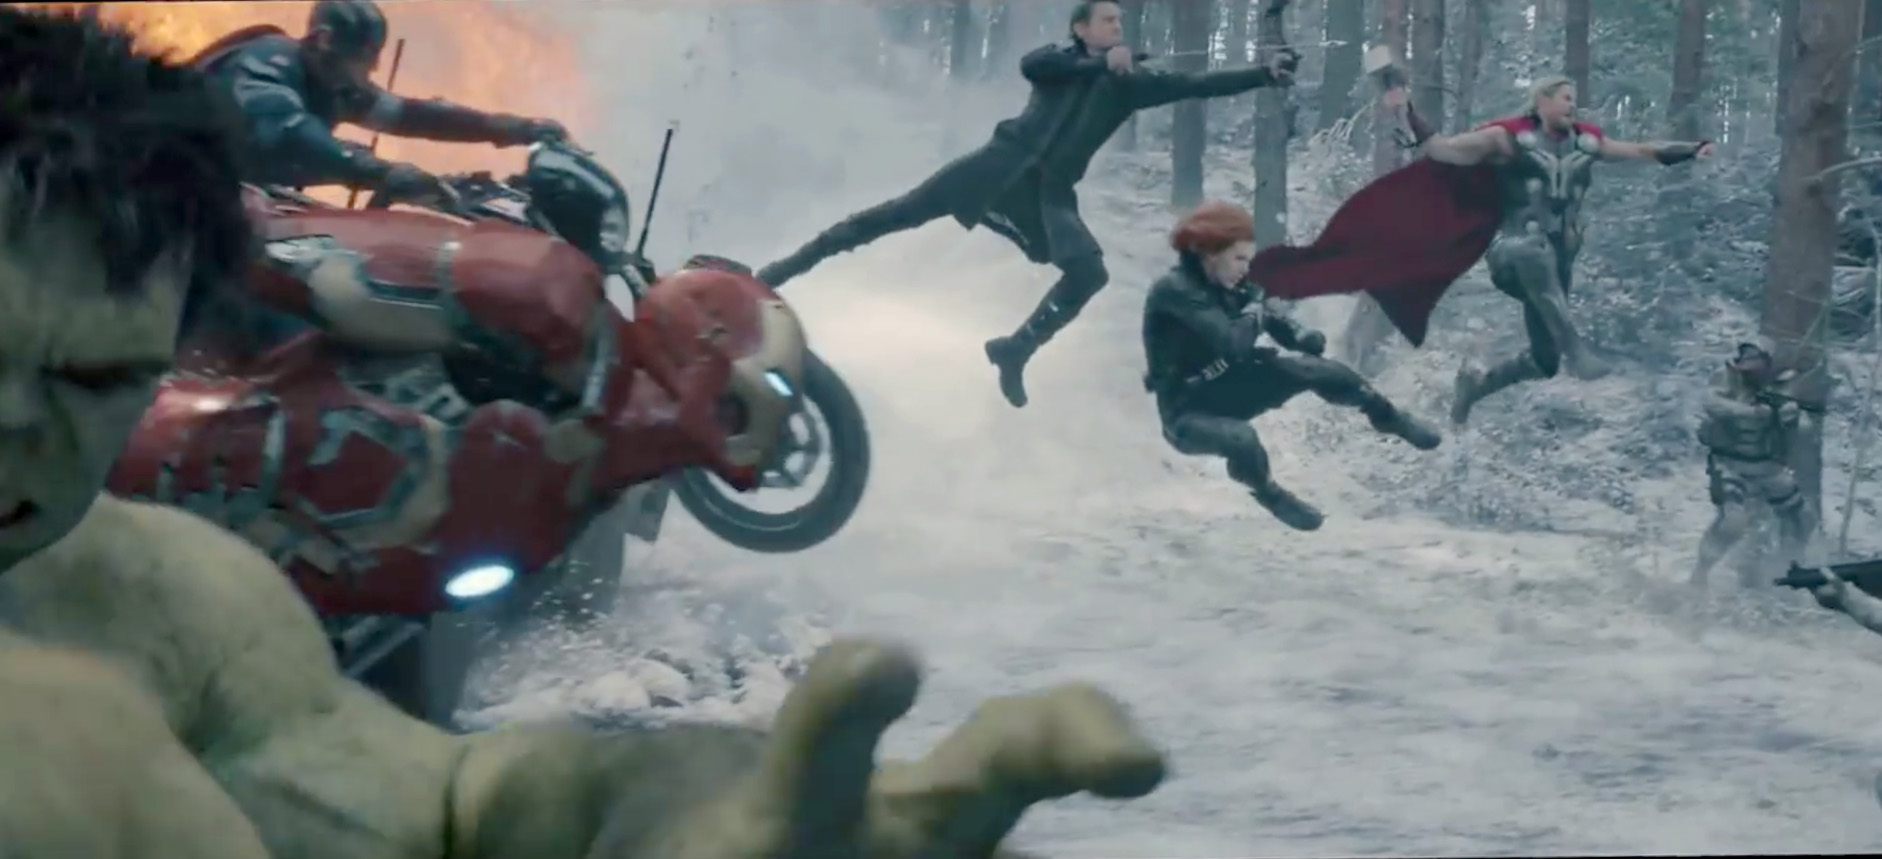 PHOTO: The Avengers team assembles in the latest trailer for Marvel's Avengers: Age of Ultron.